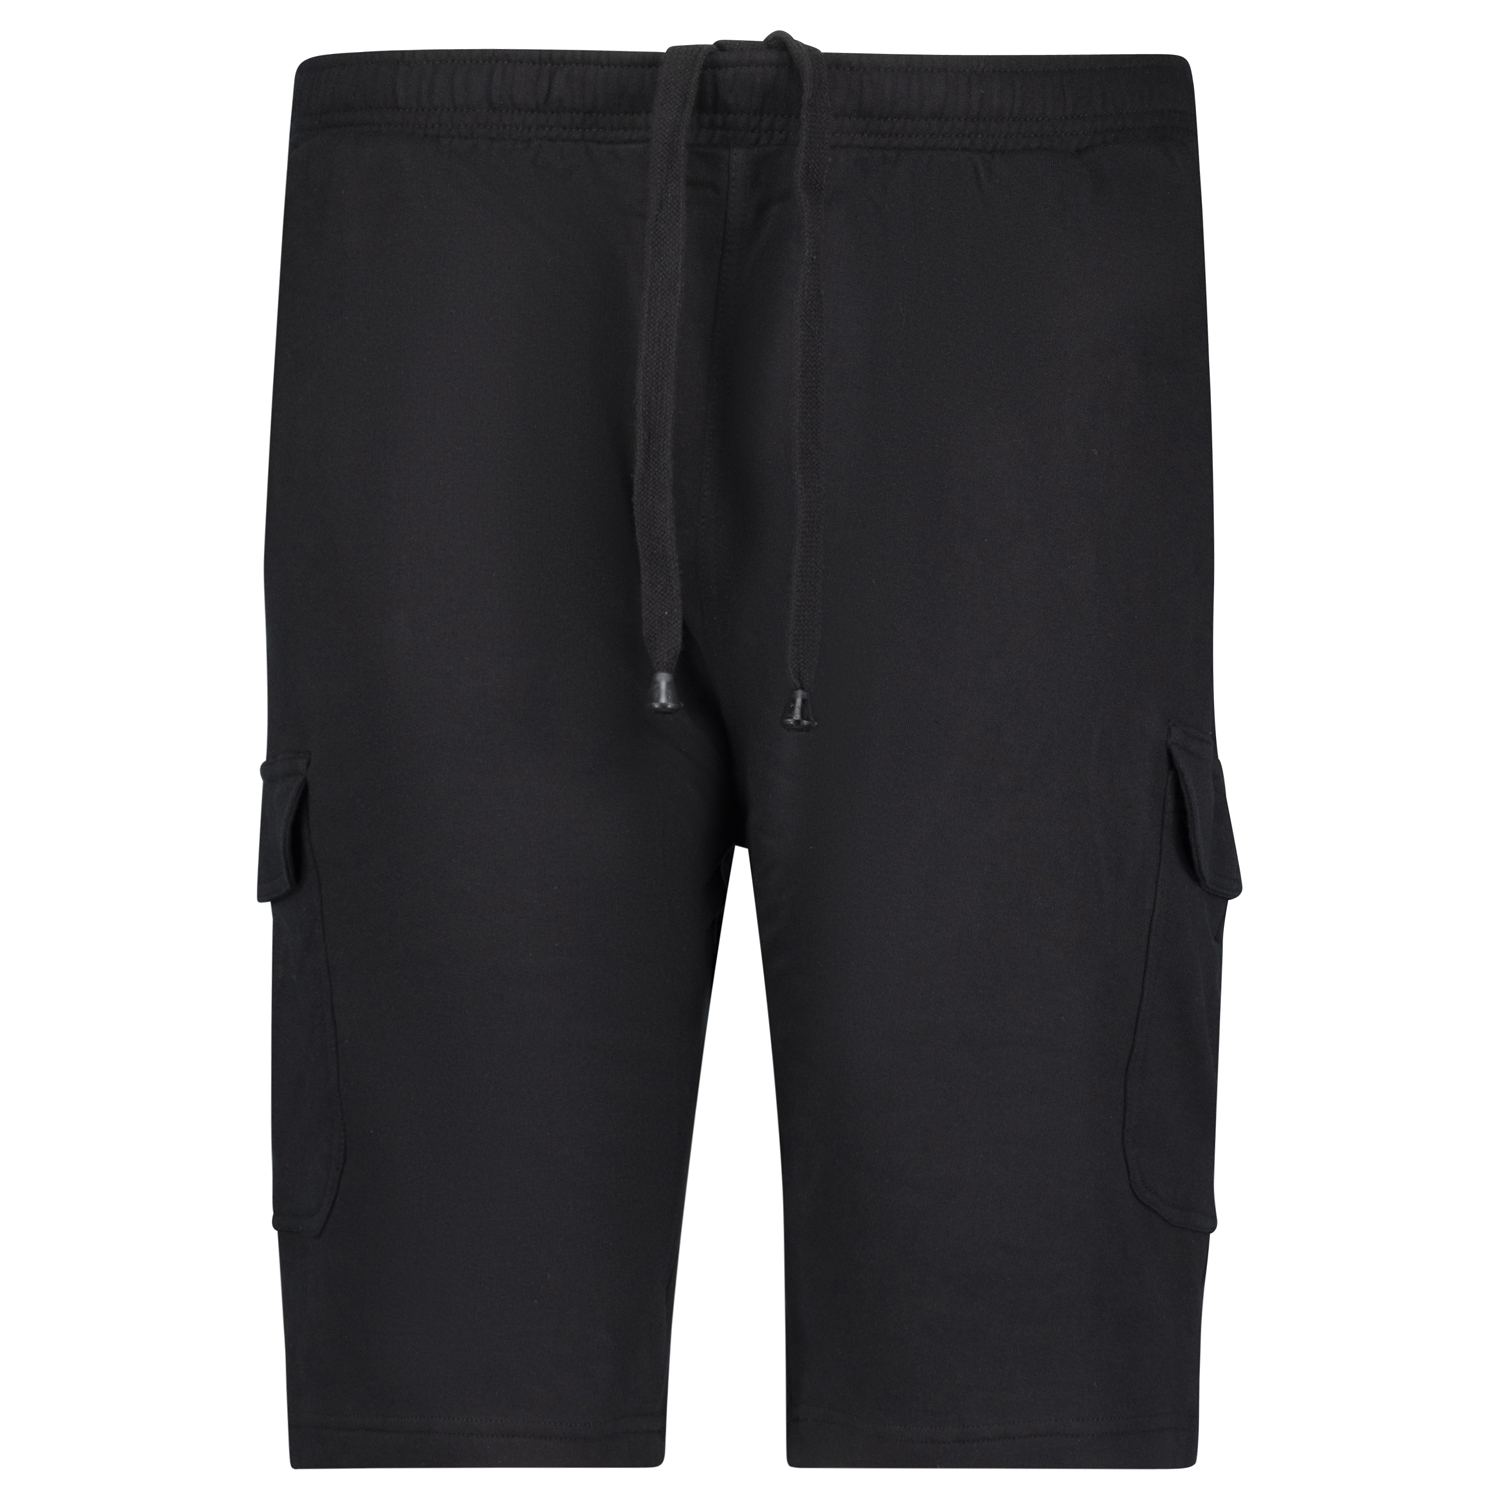 Cargo shorts in black for men by Adamo series "Athen" in oversizes up to 14XL